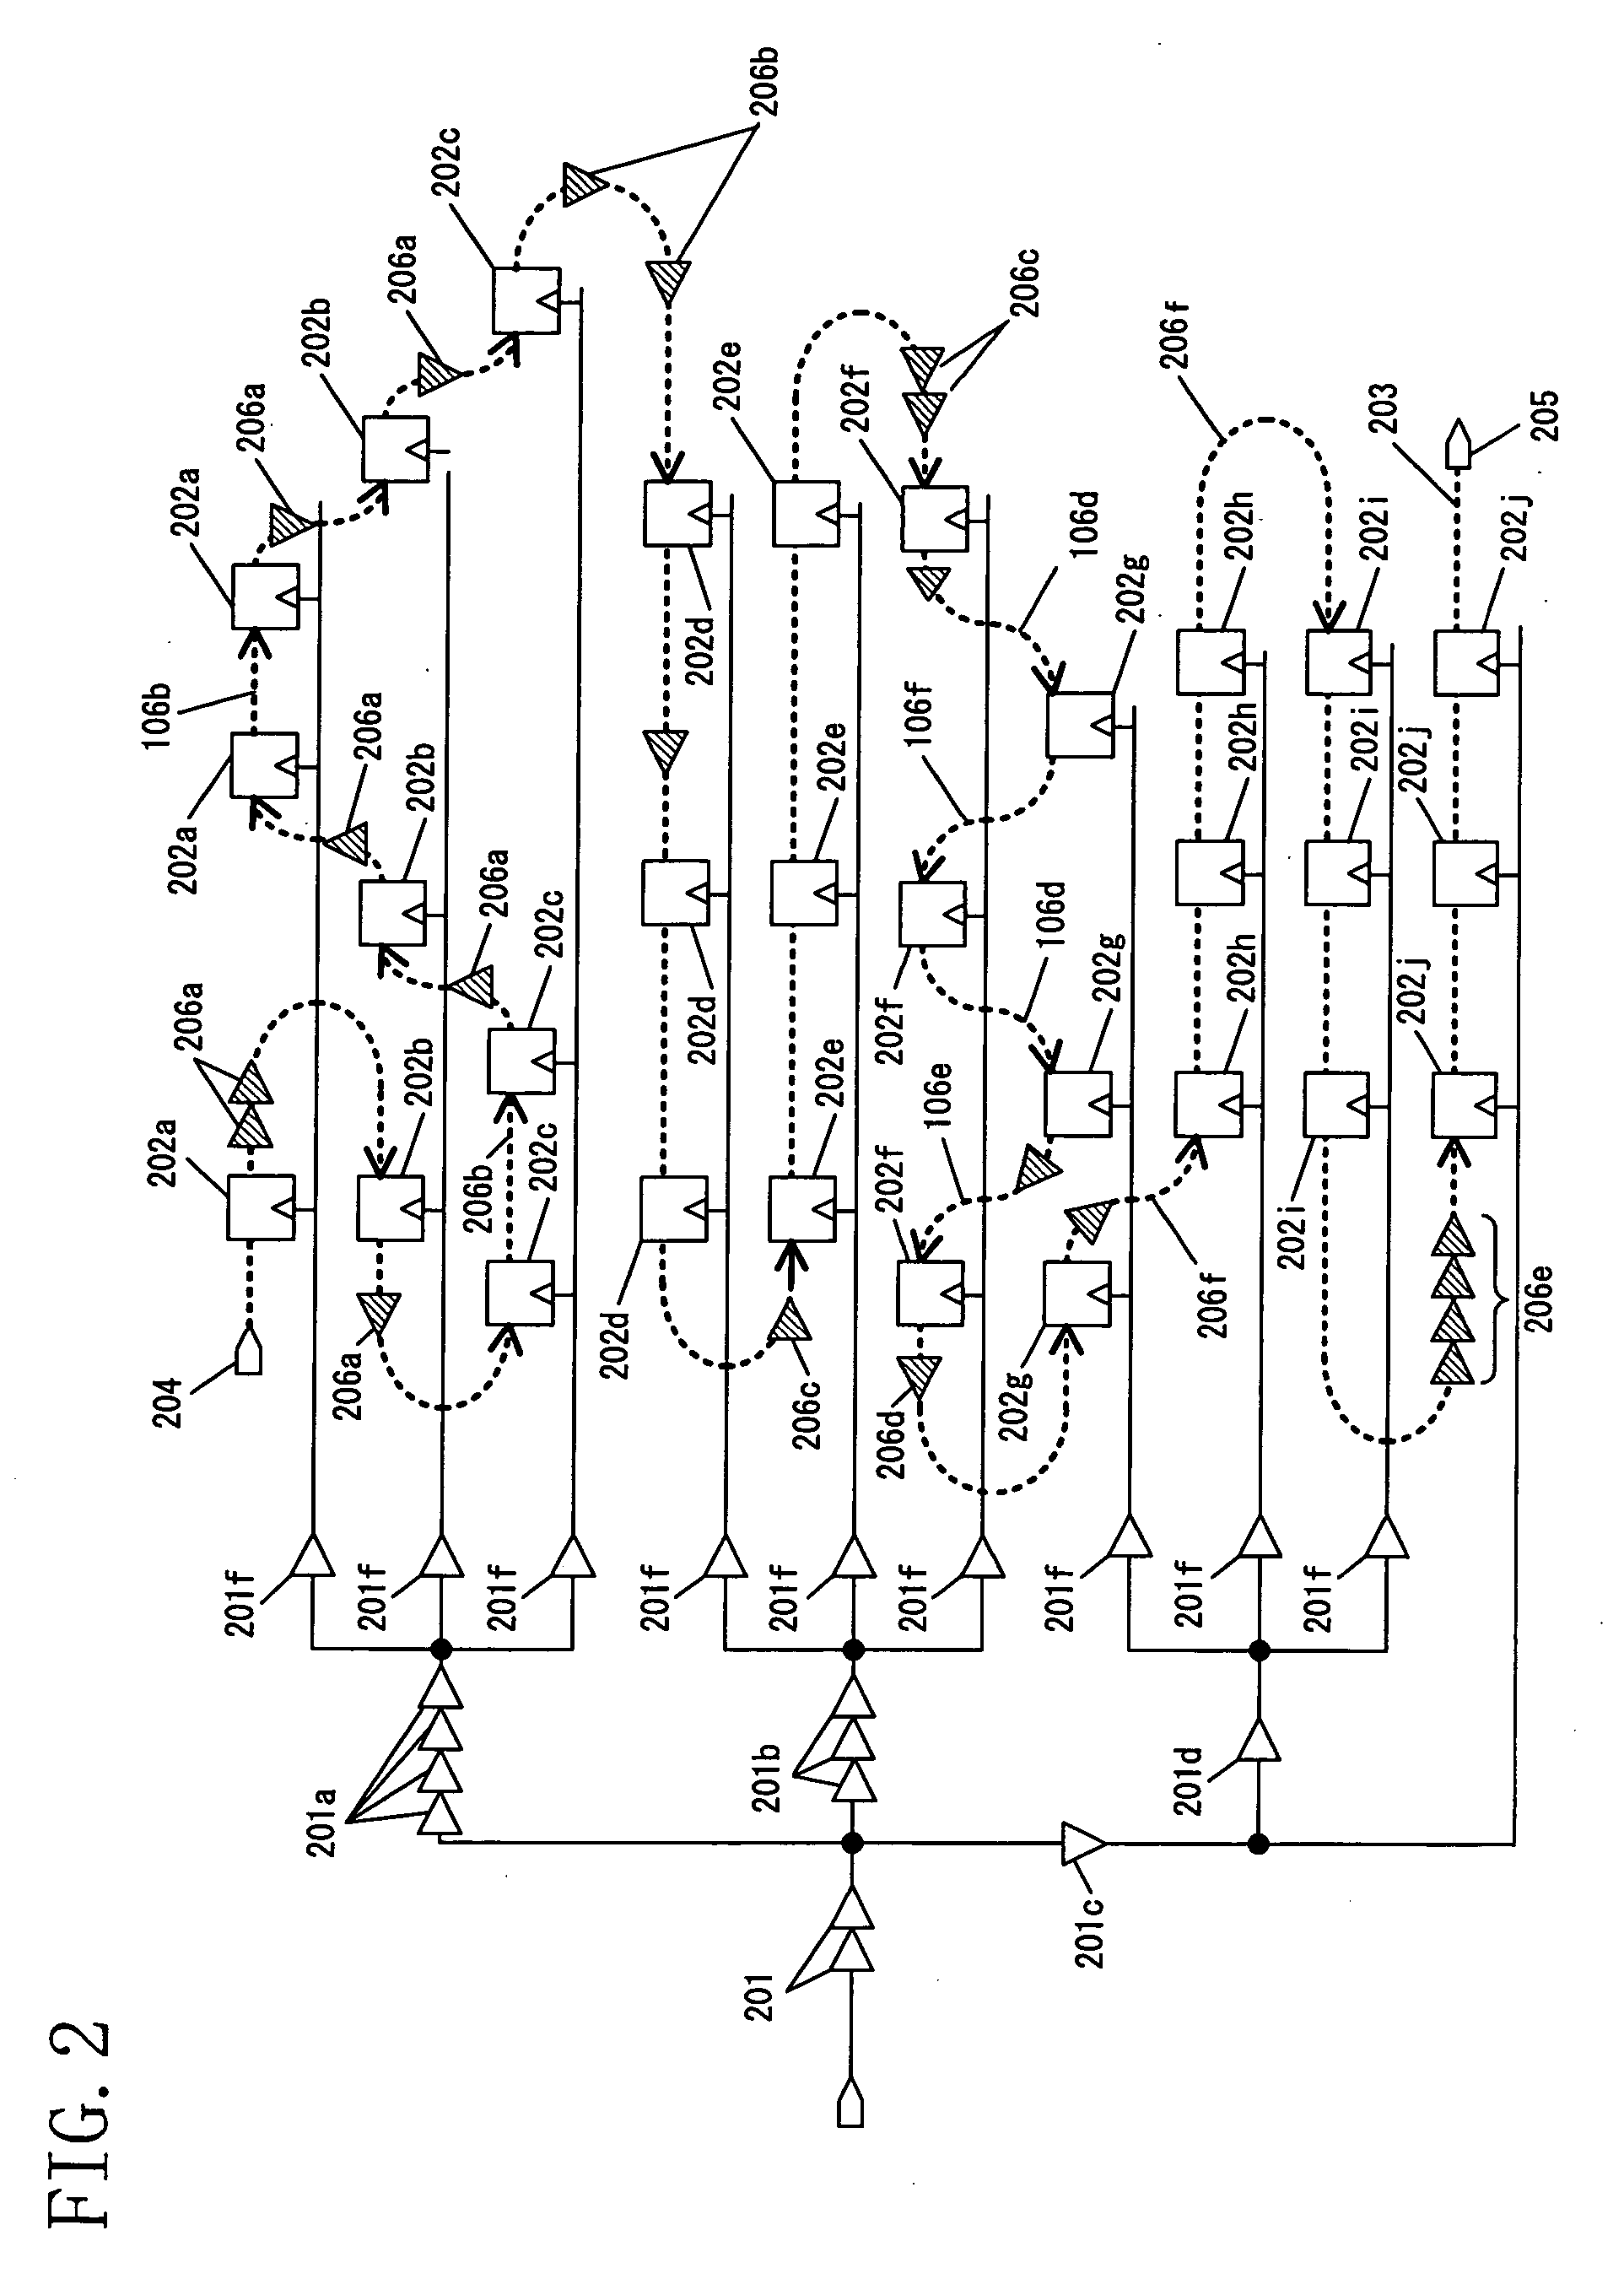 Scan test design method, scan test circuit, scan test circuit insertion cad program, large-scale integrated circuit and mobile digital equipment